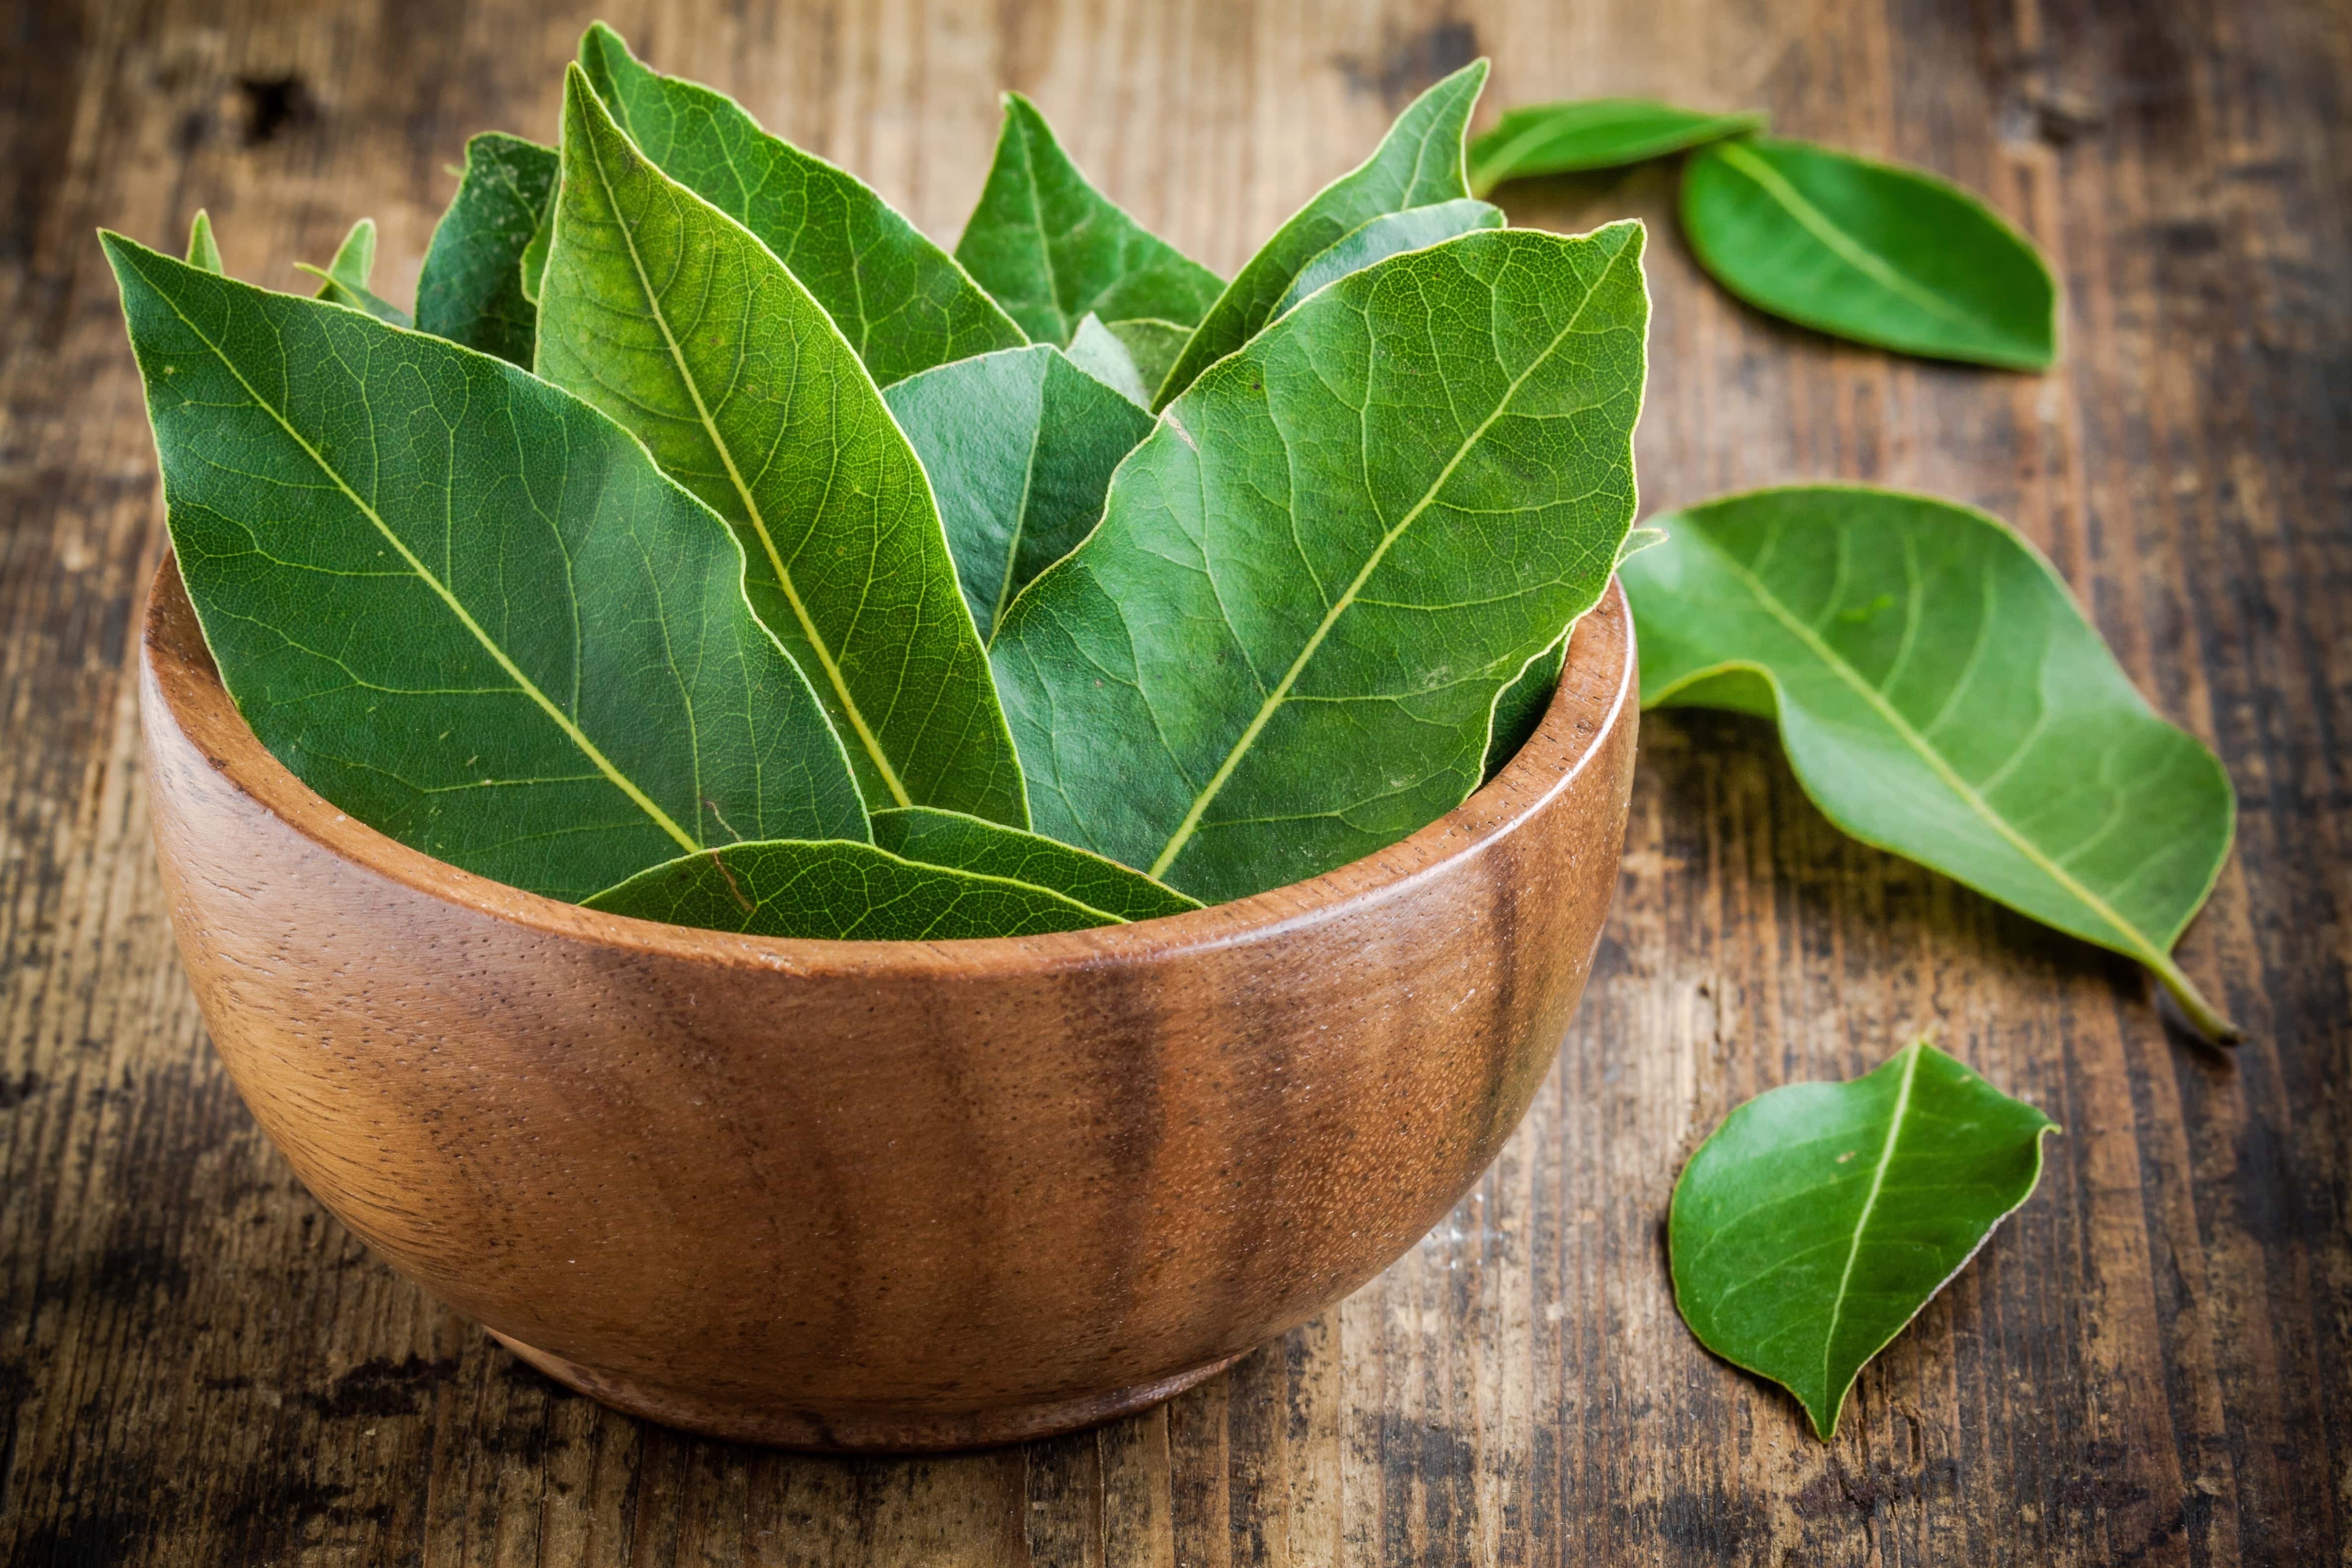 bay leaves to remove wooden pest